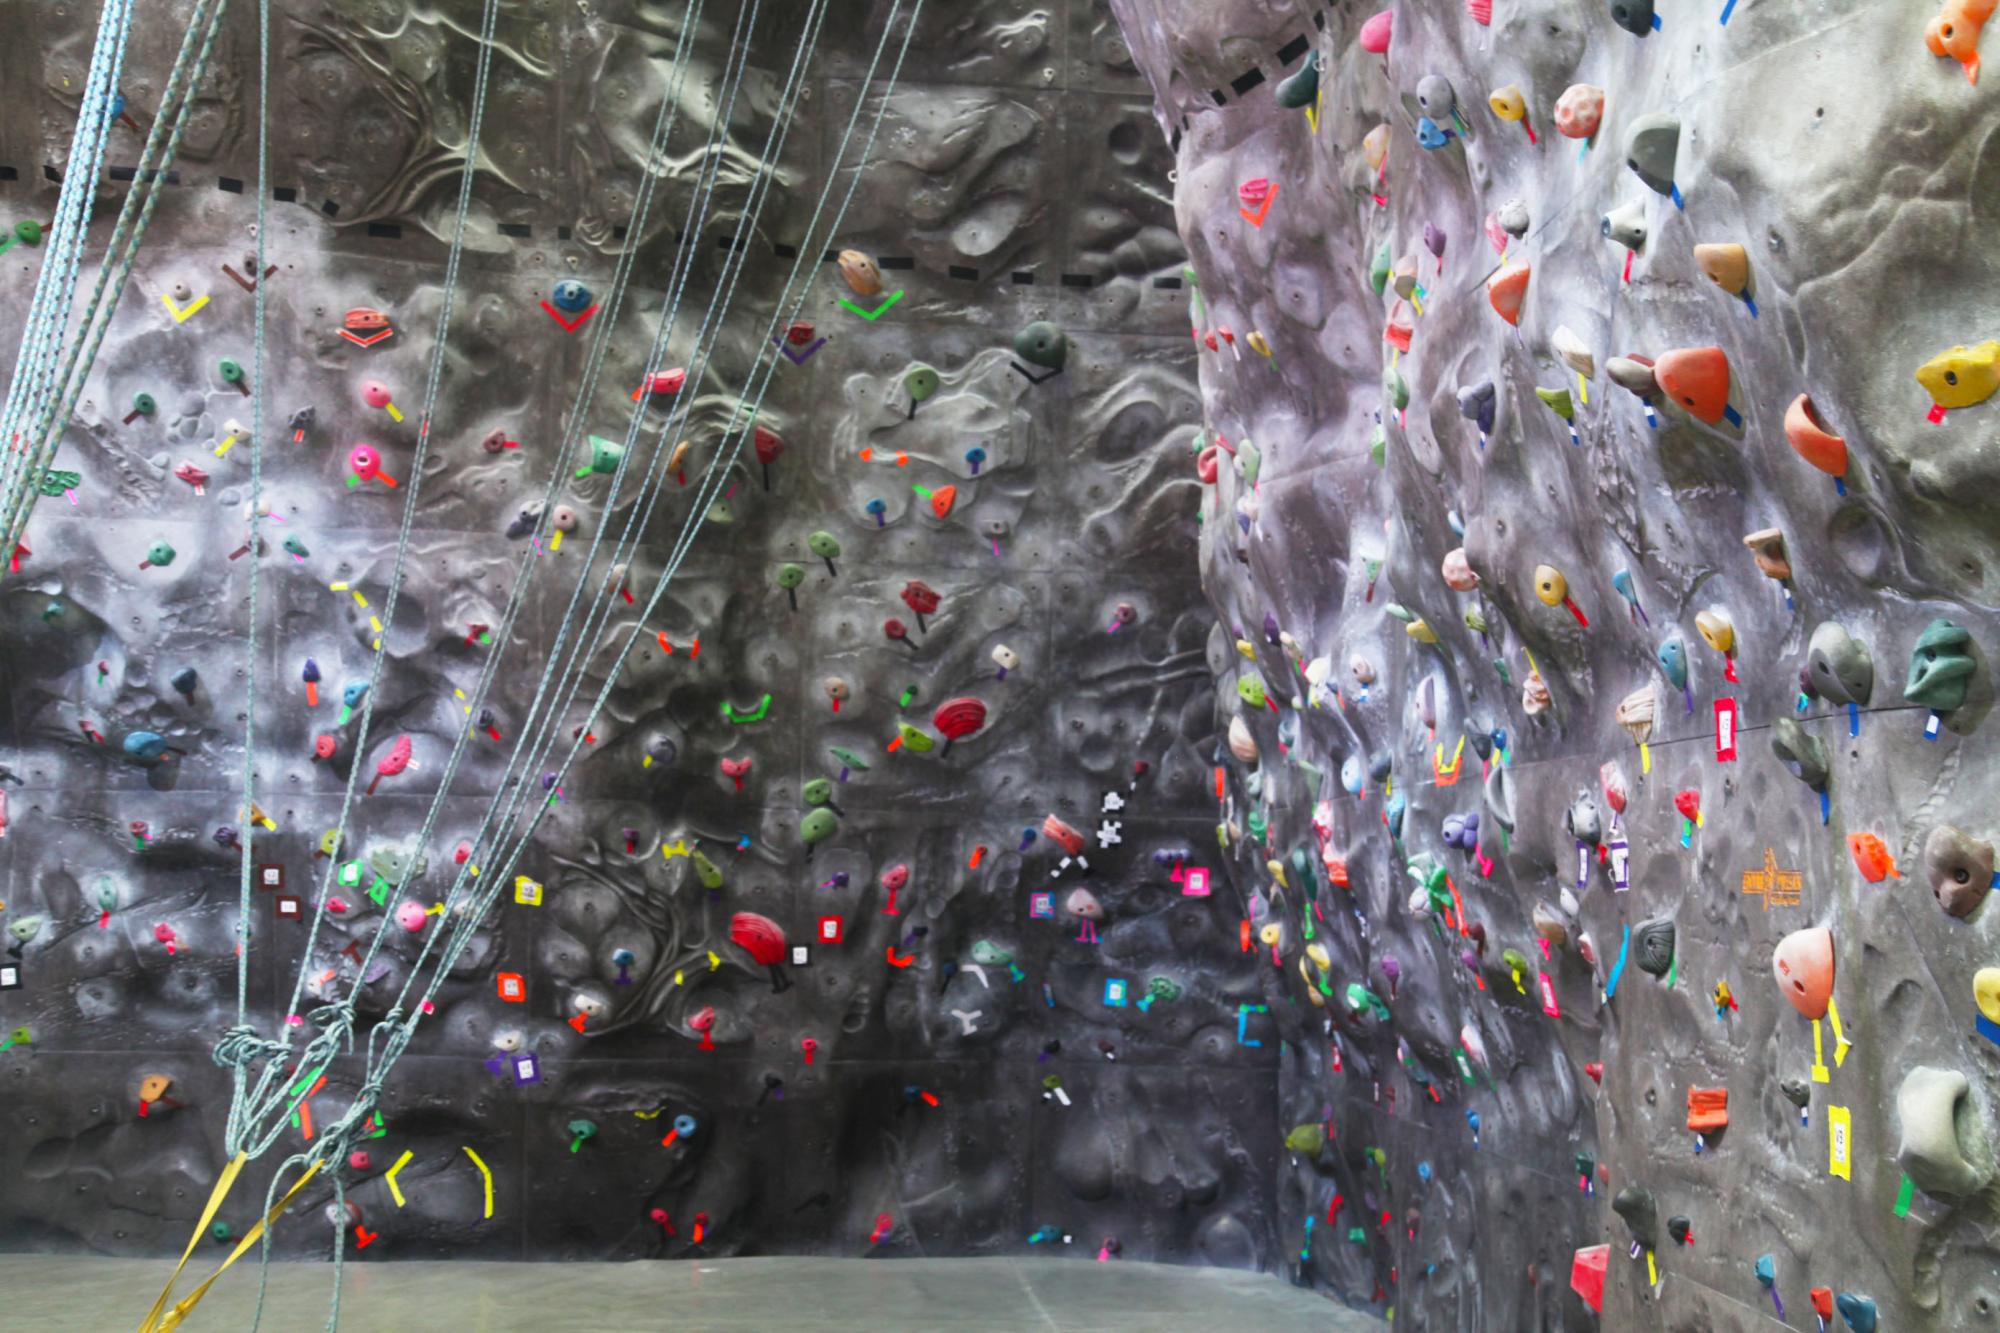 WWU climbing wall with colorful climbing tape and climbing holds